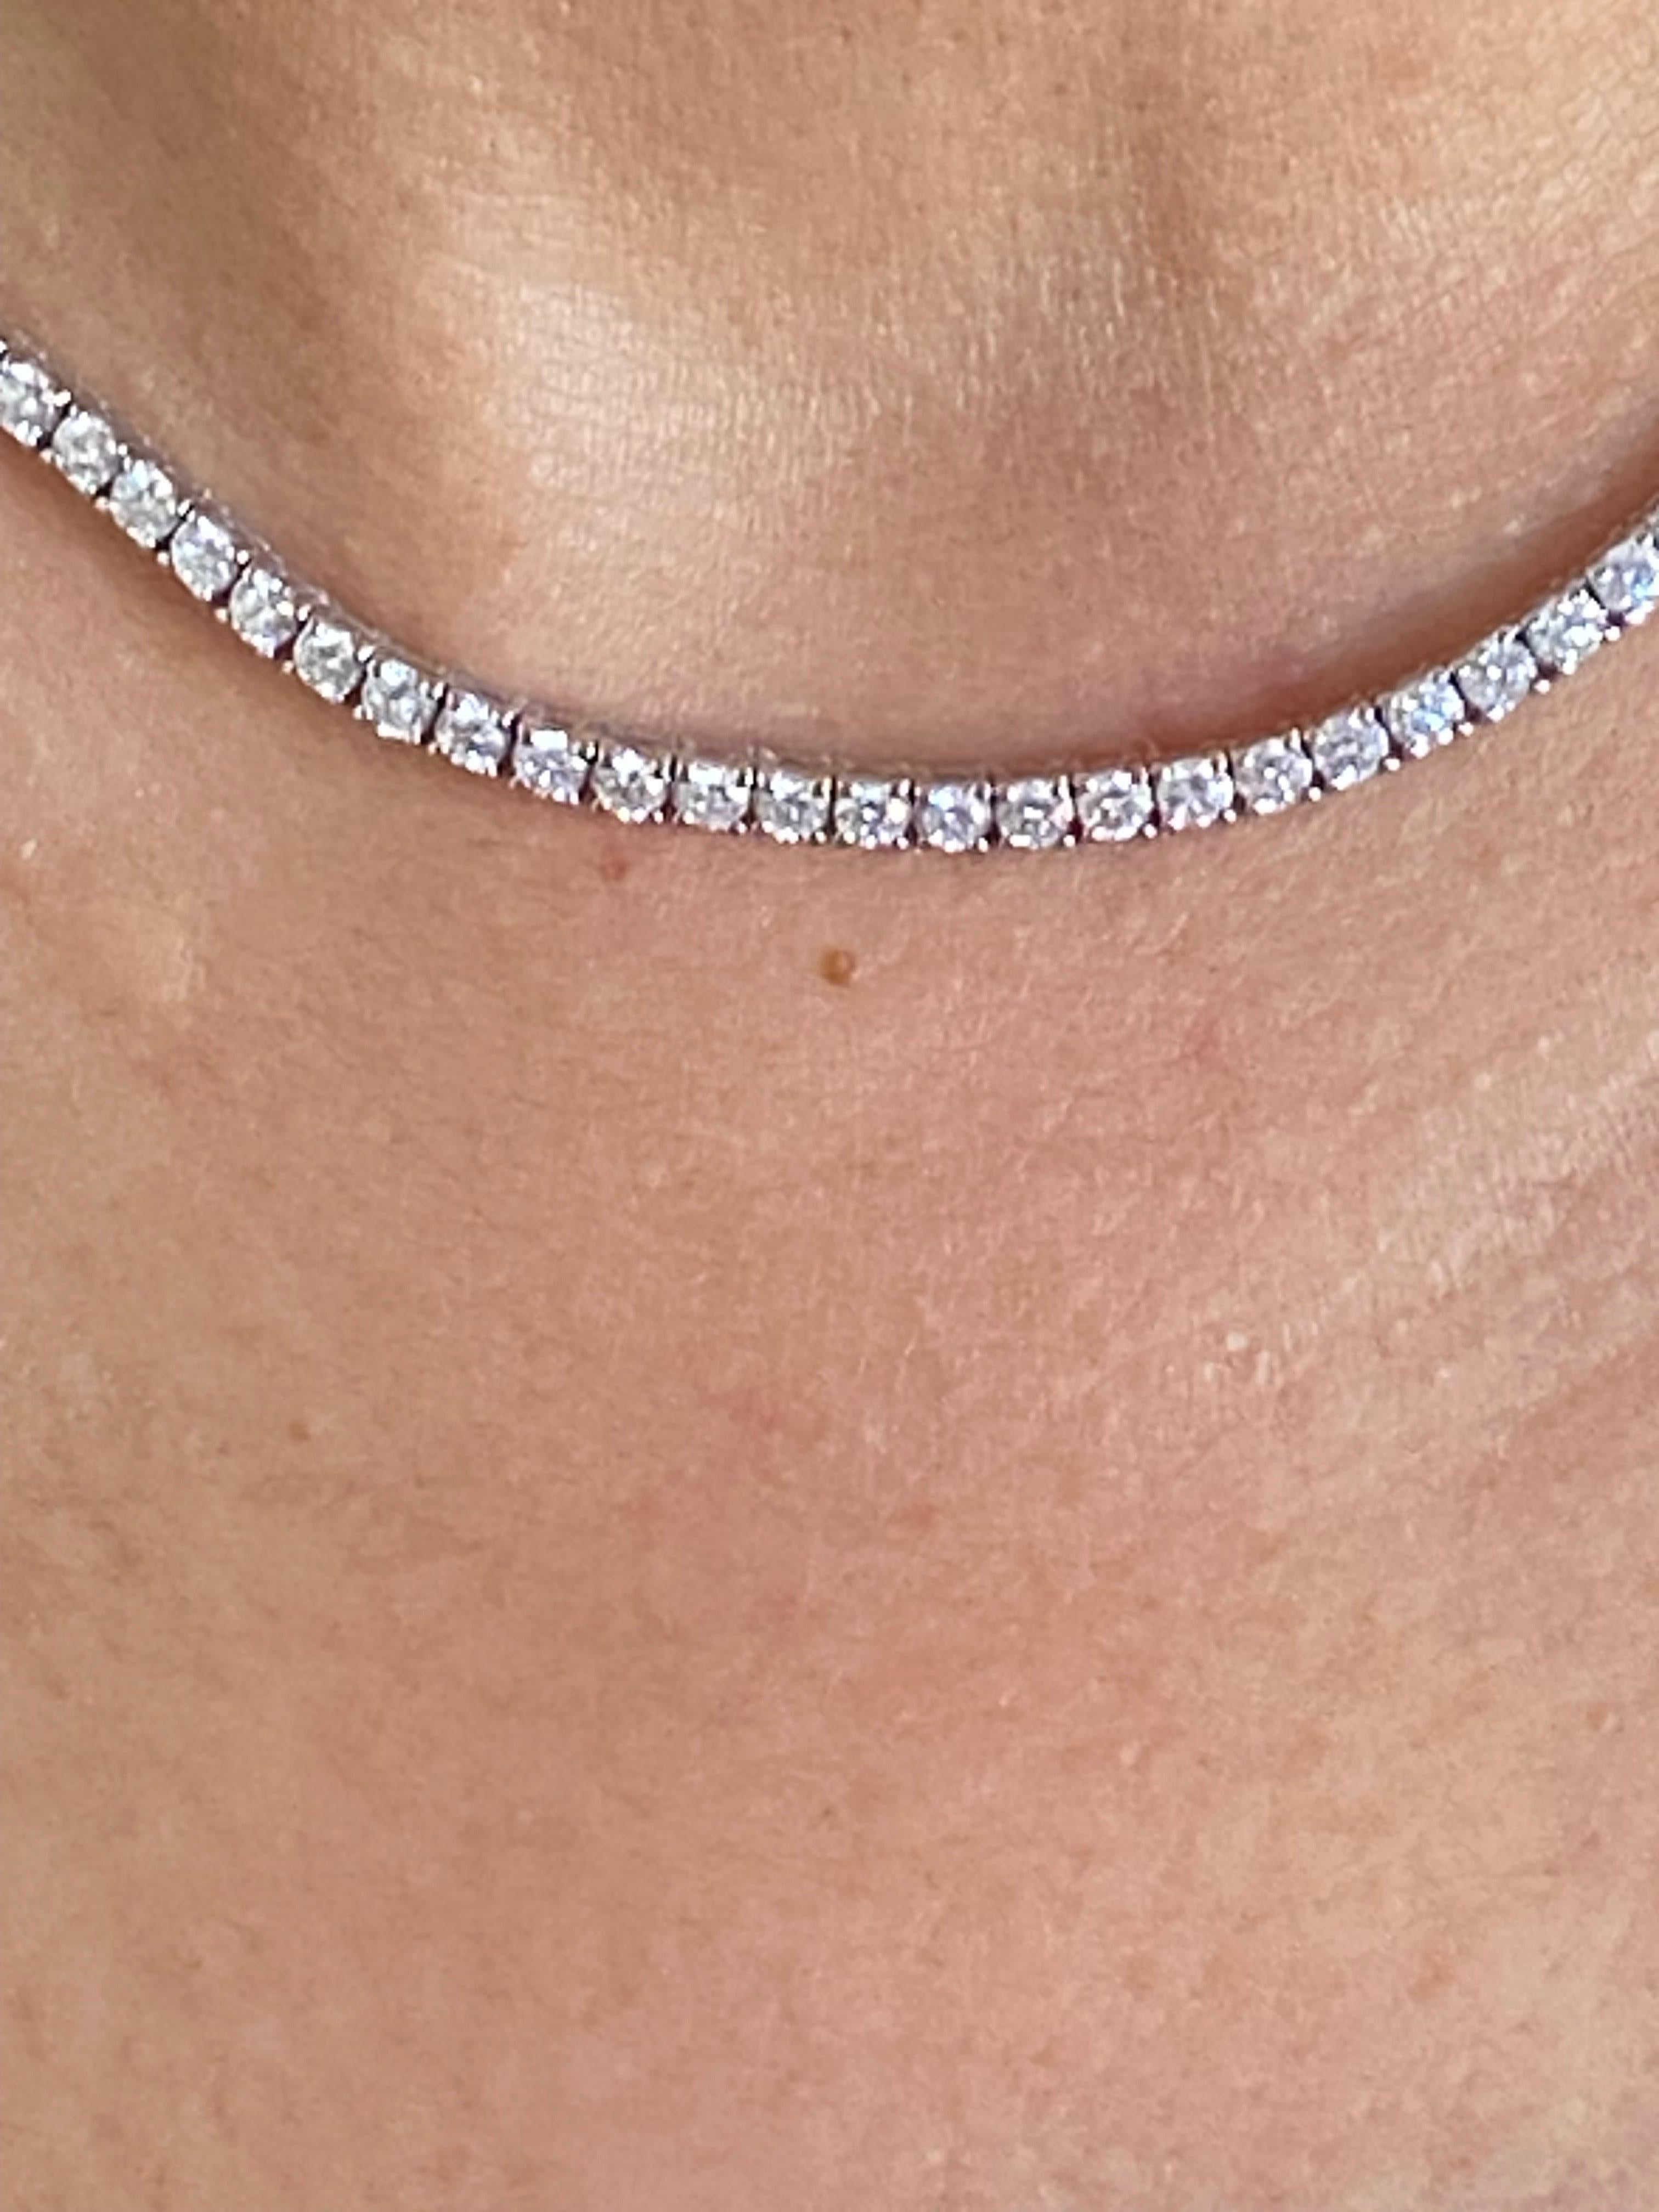 Diamond tennis necklace set with 0.15 carat stones each in 14K white gold. The total weight is 15.62 carats. The color of the stones are G, the clarity is SI1-SI2. The total length of the piece is 17 inches.